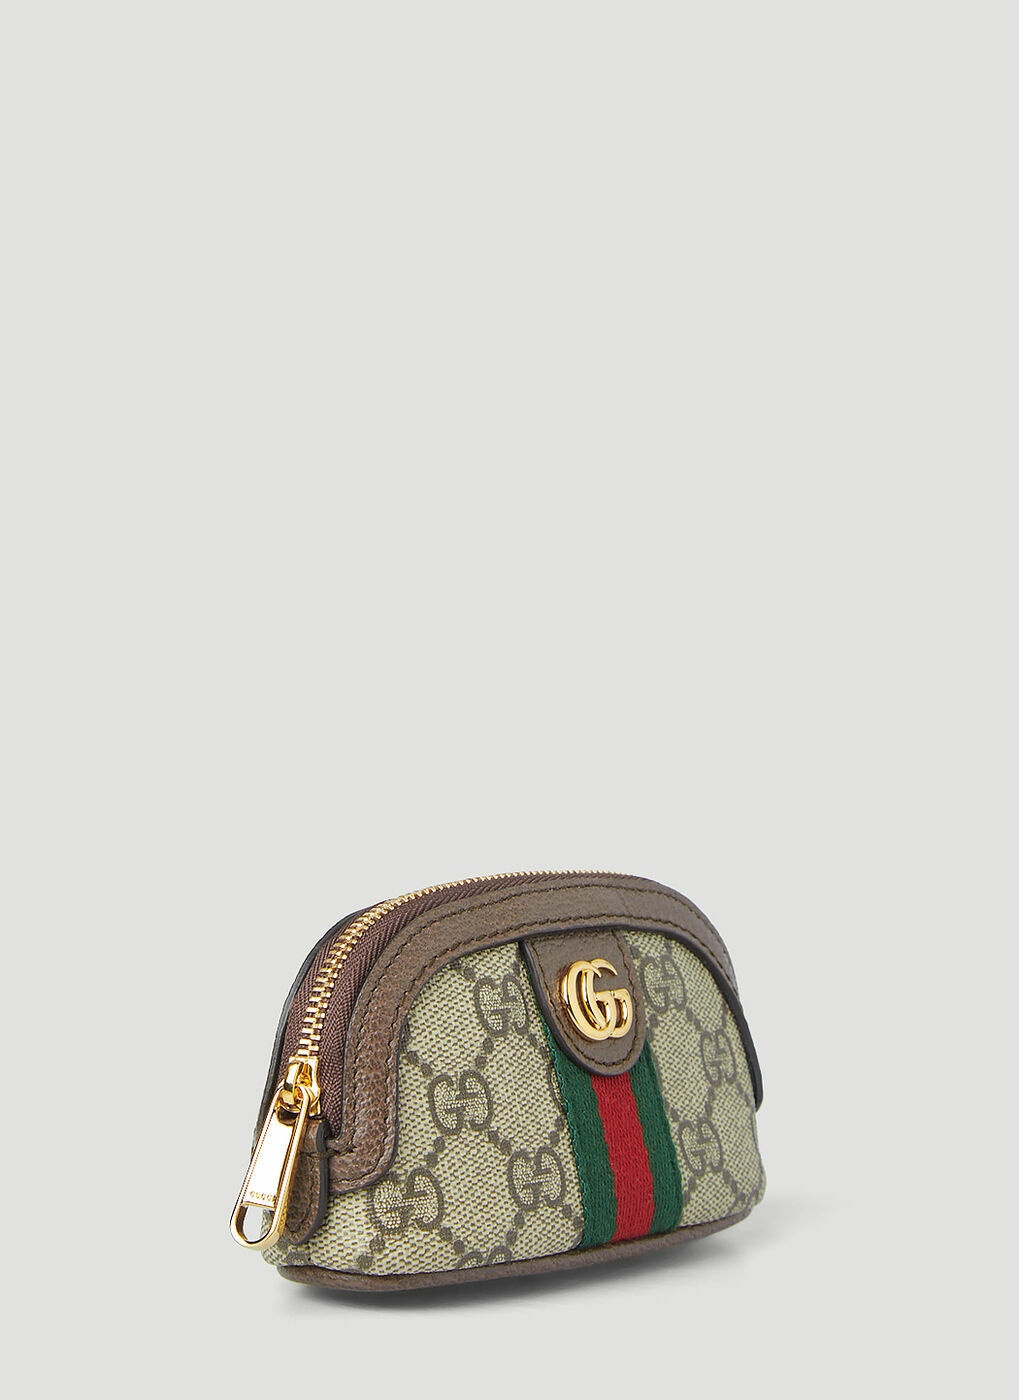 Ophidia GG Keychain Coin Purse in Beige Gucci